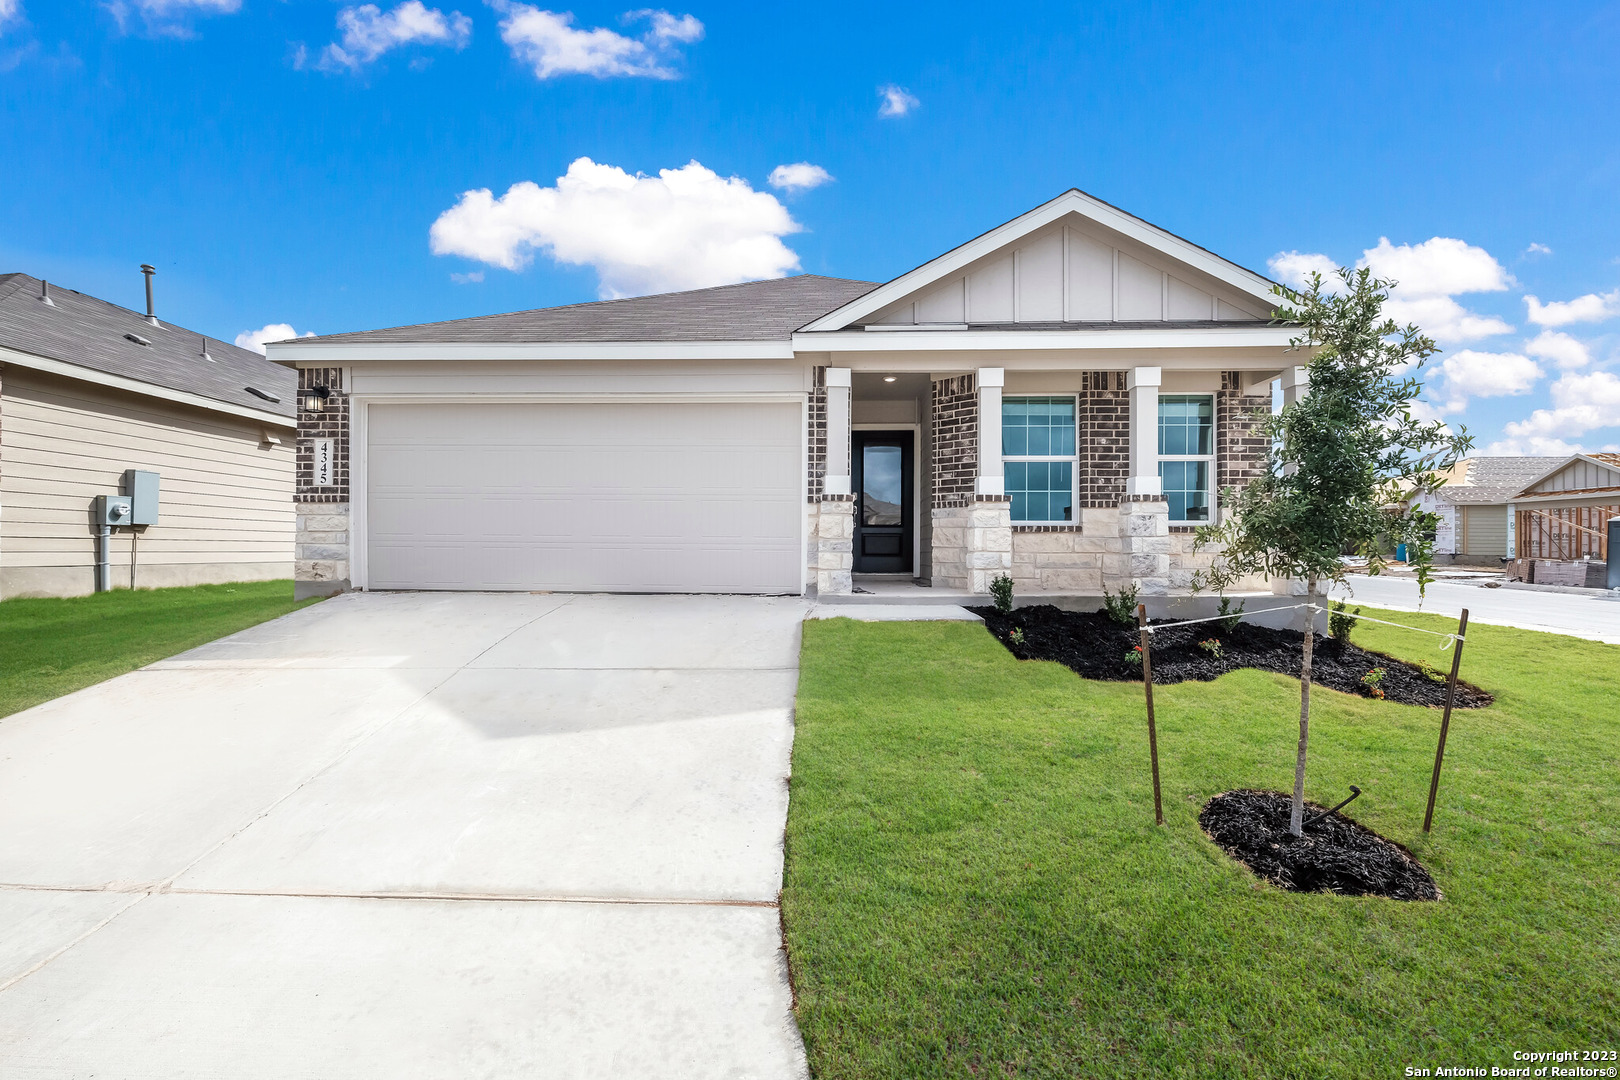 Photo of 3544 Axis Hill St in New Braunfels, TX